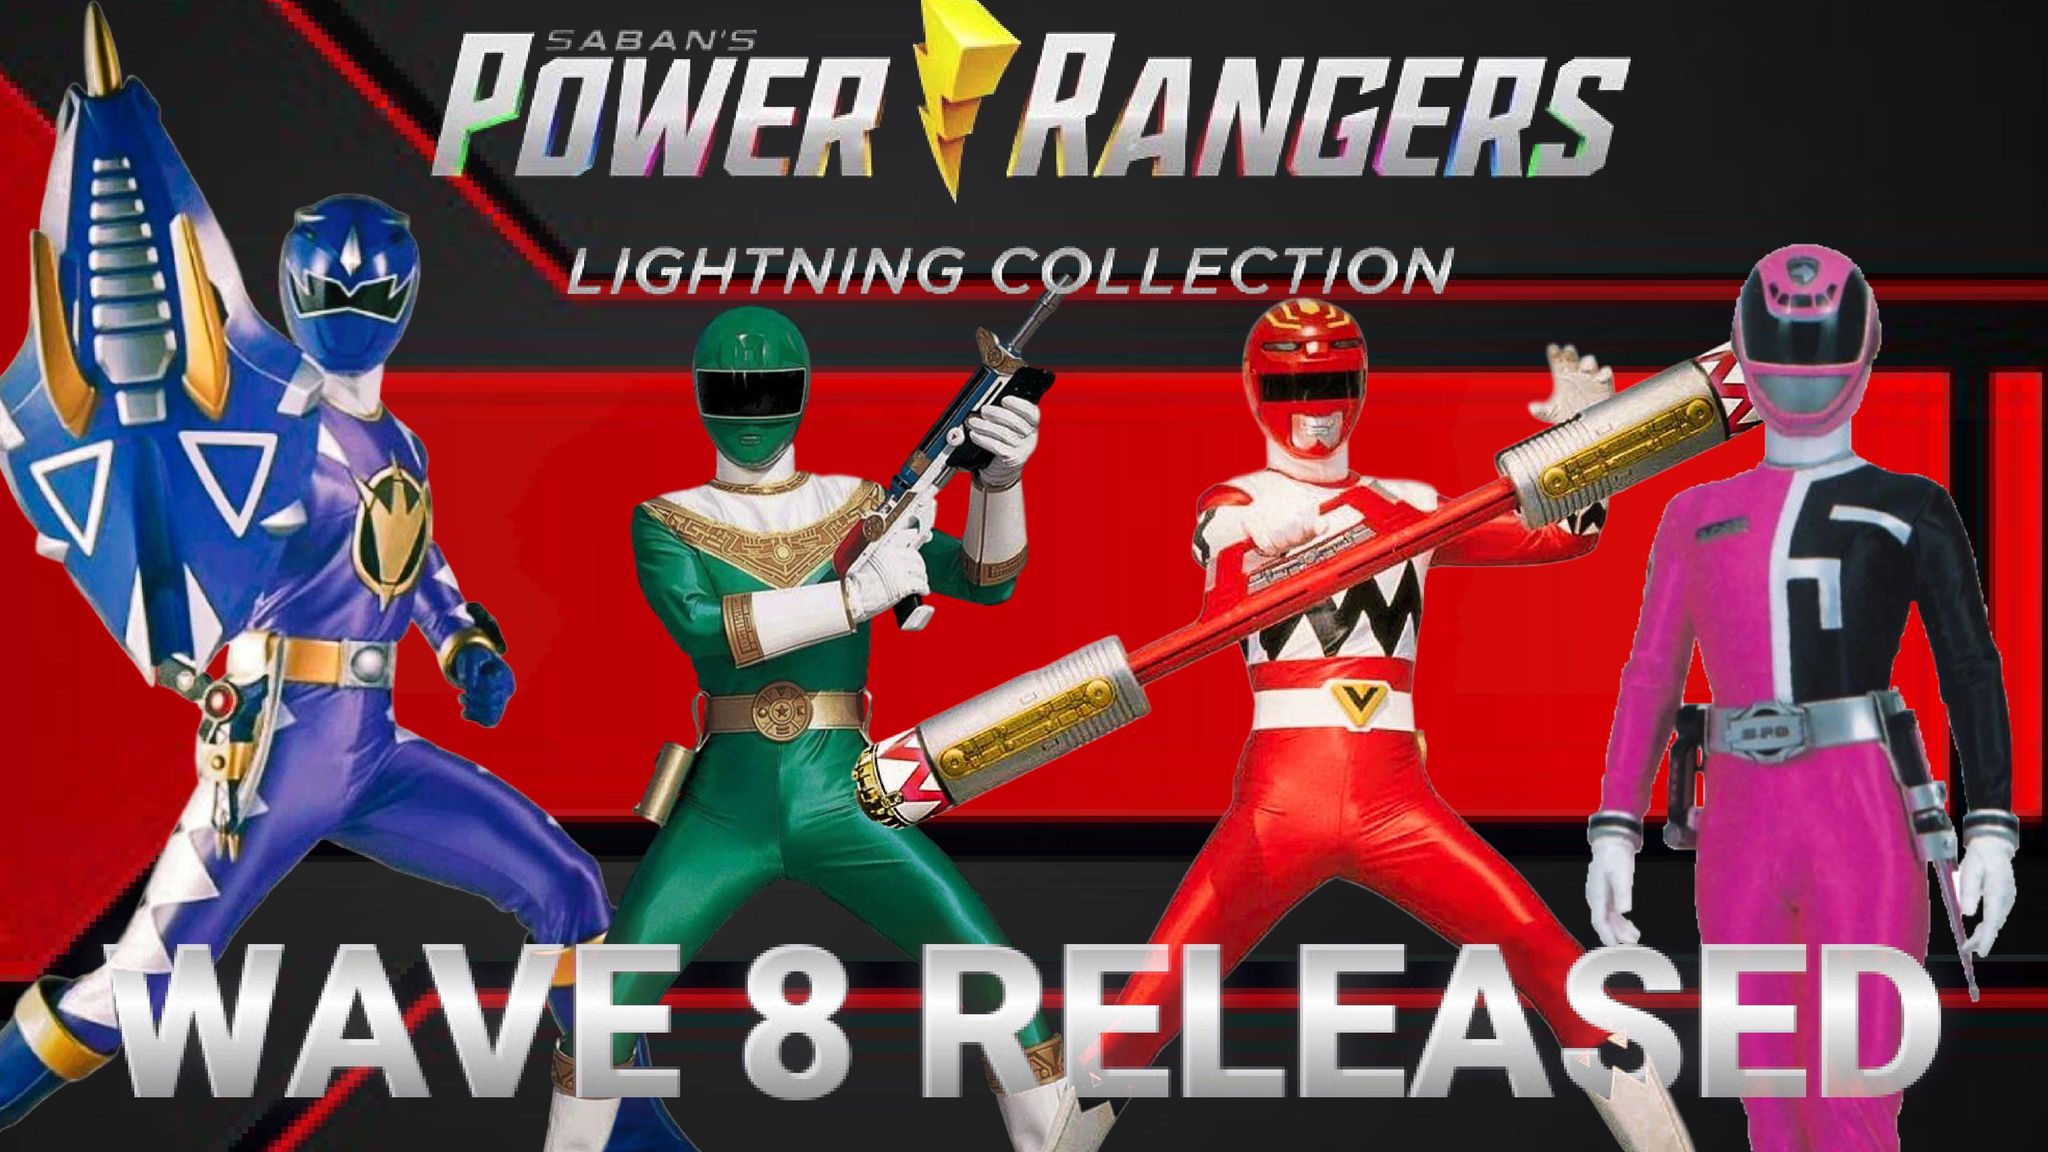 LIGHTNING JUST STRUCK! HASBRO’S POWER RANGERS LIGHTNING COLLECTION FIGURES WAVE 8 NOW AVAILABLE FOR PRE-ORDERS